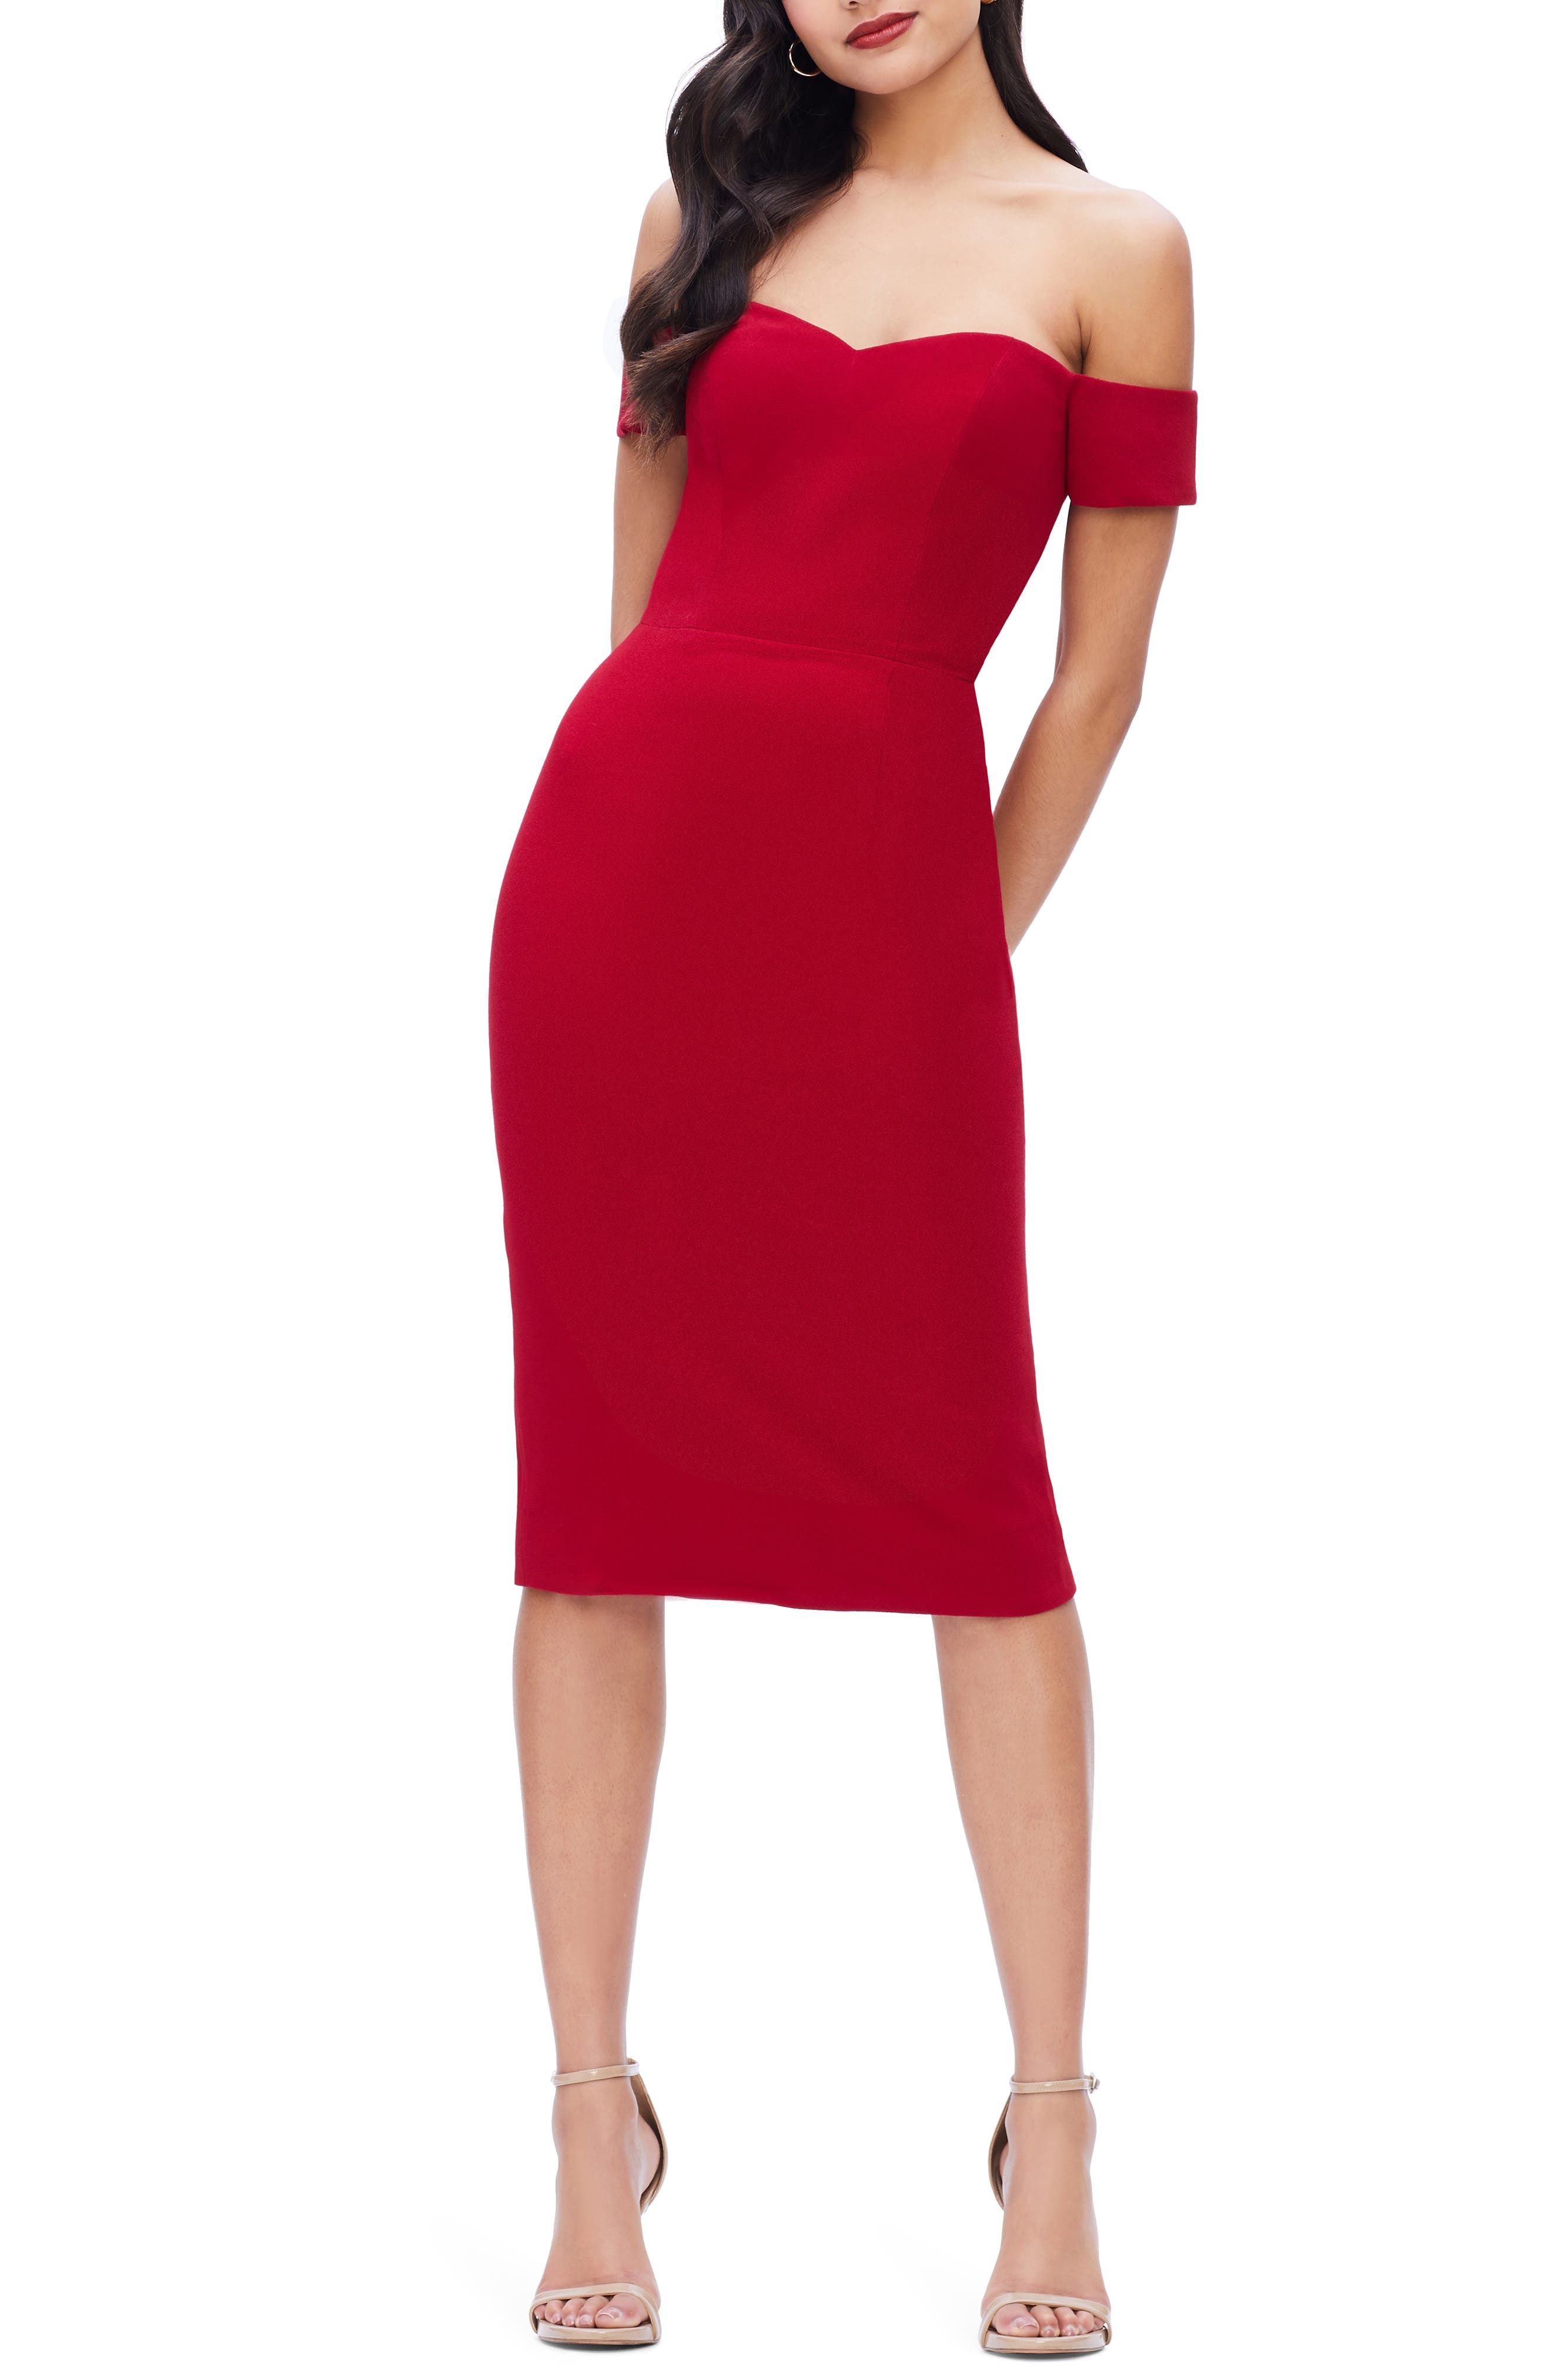 dress the population bailey off the shoulder bodycon dress